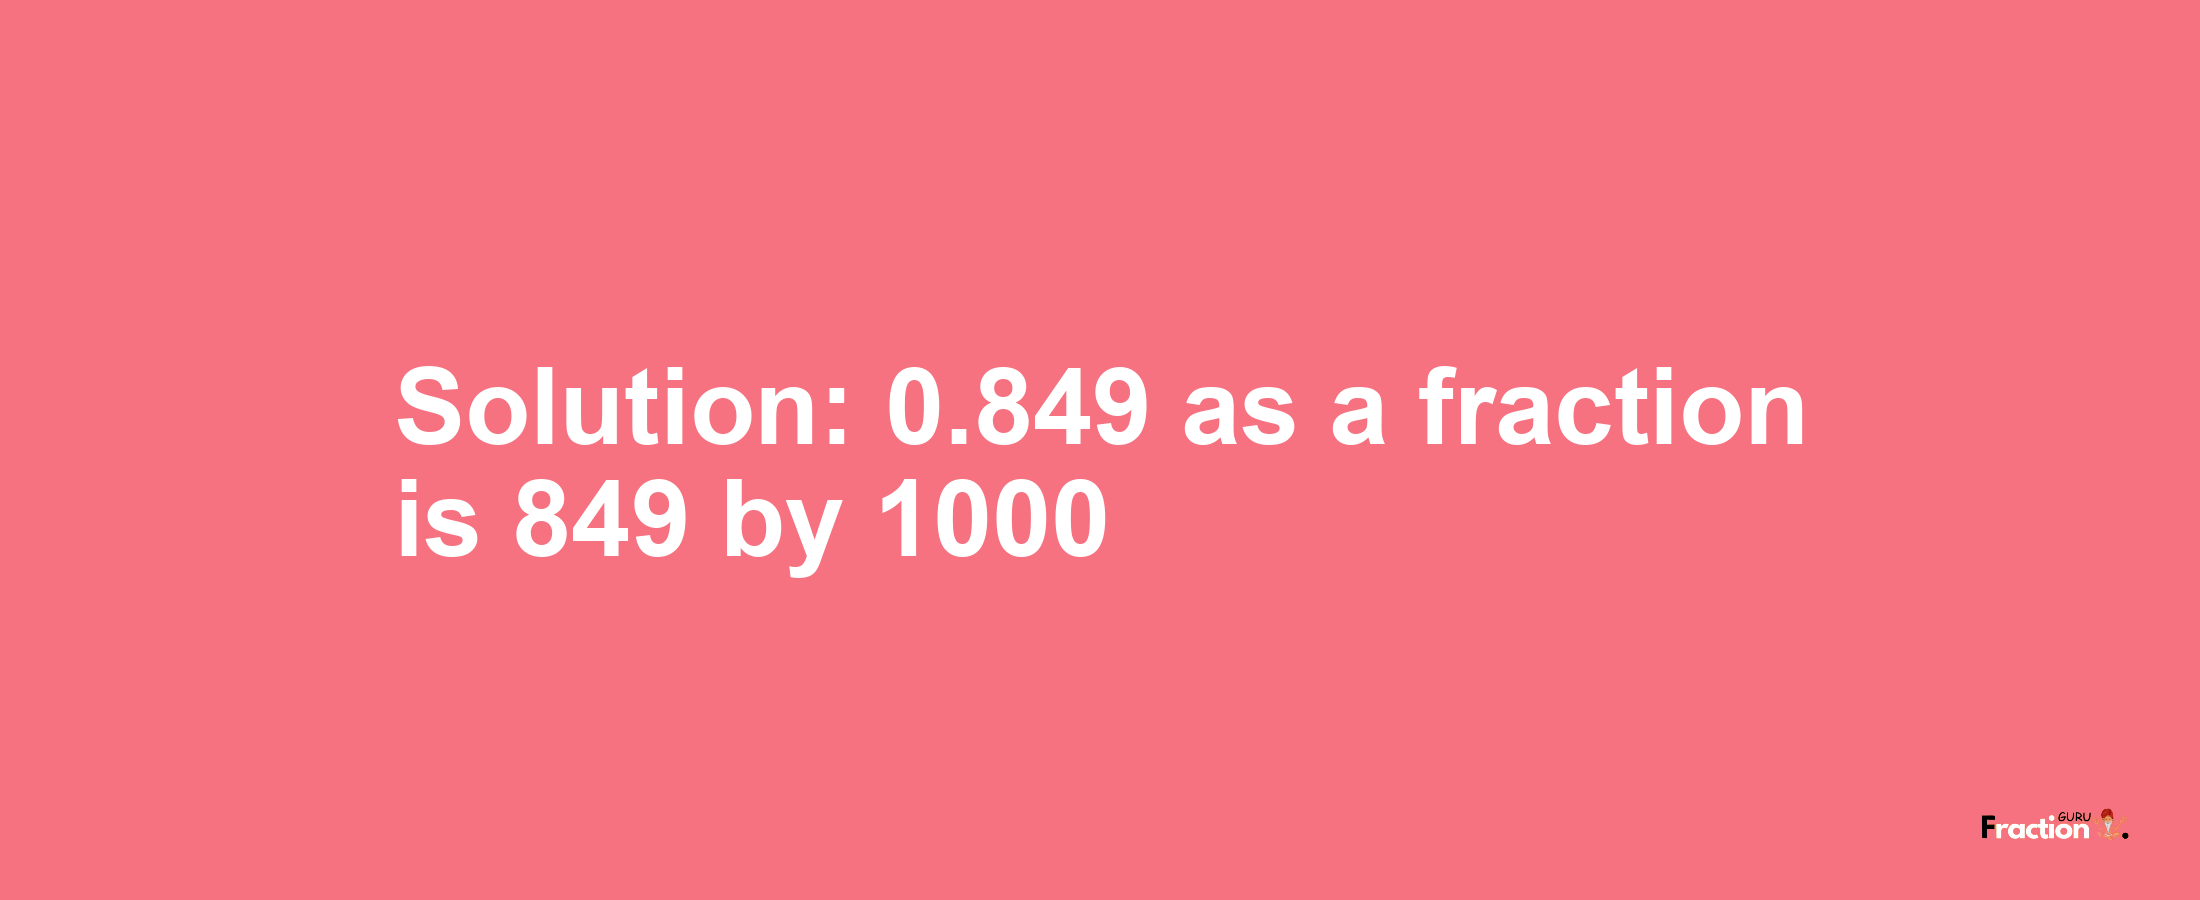 Solution:0.849 as a fraction is 849/1000